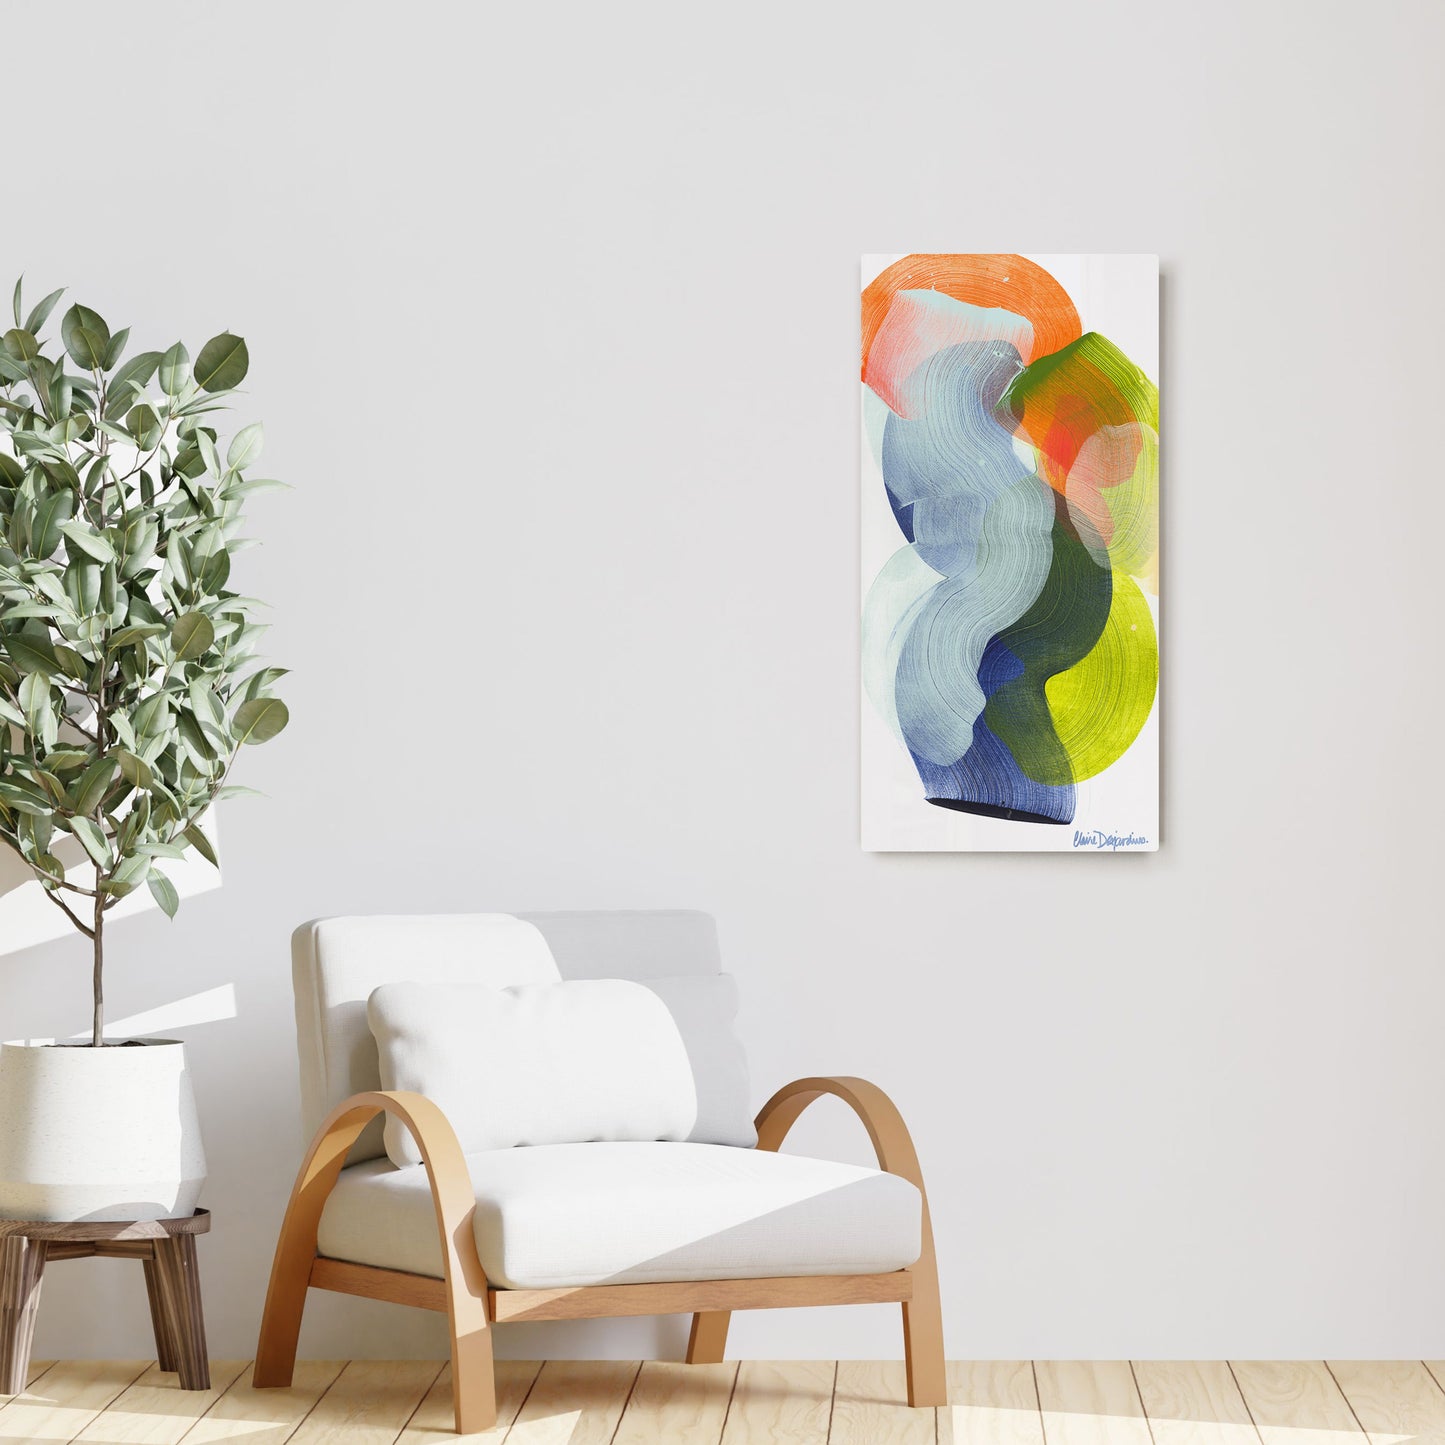 Claire Desjardins' Bite of an Apple painting reproduced on HD metal print and displayed on wall